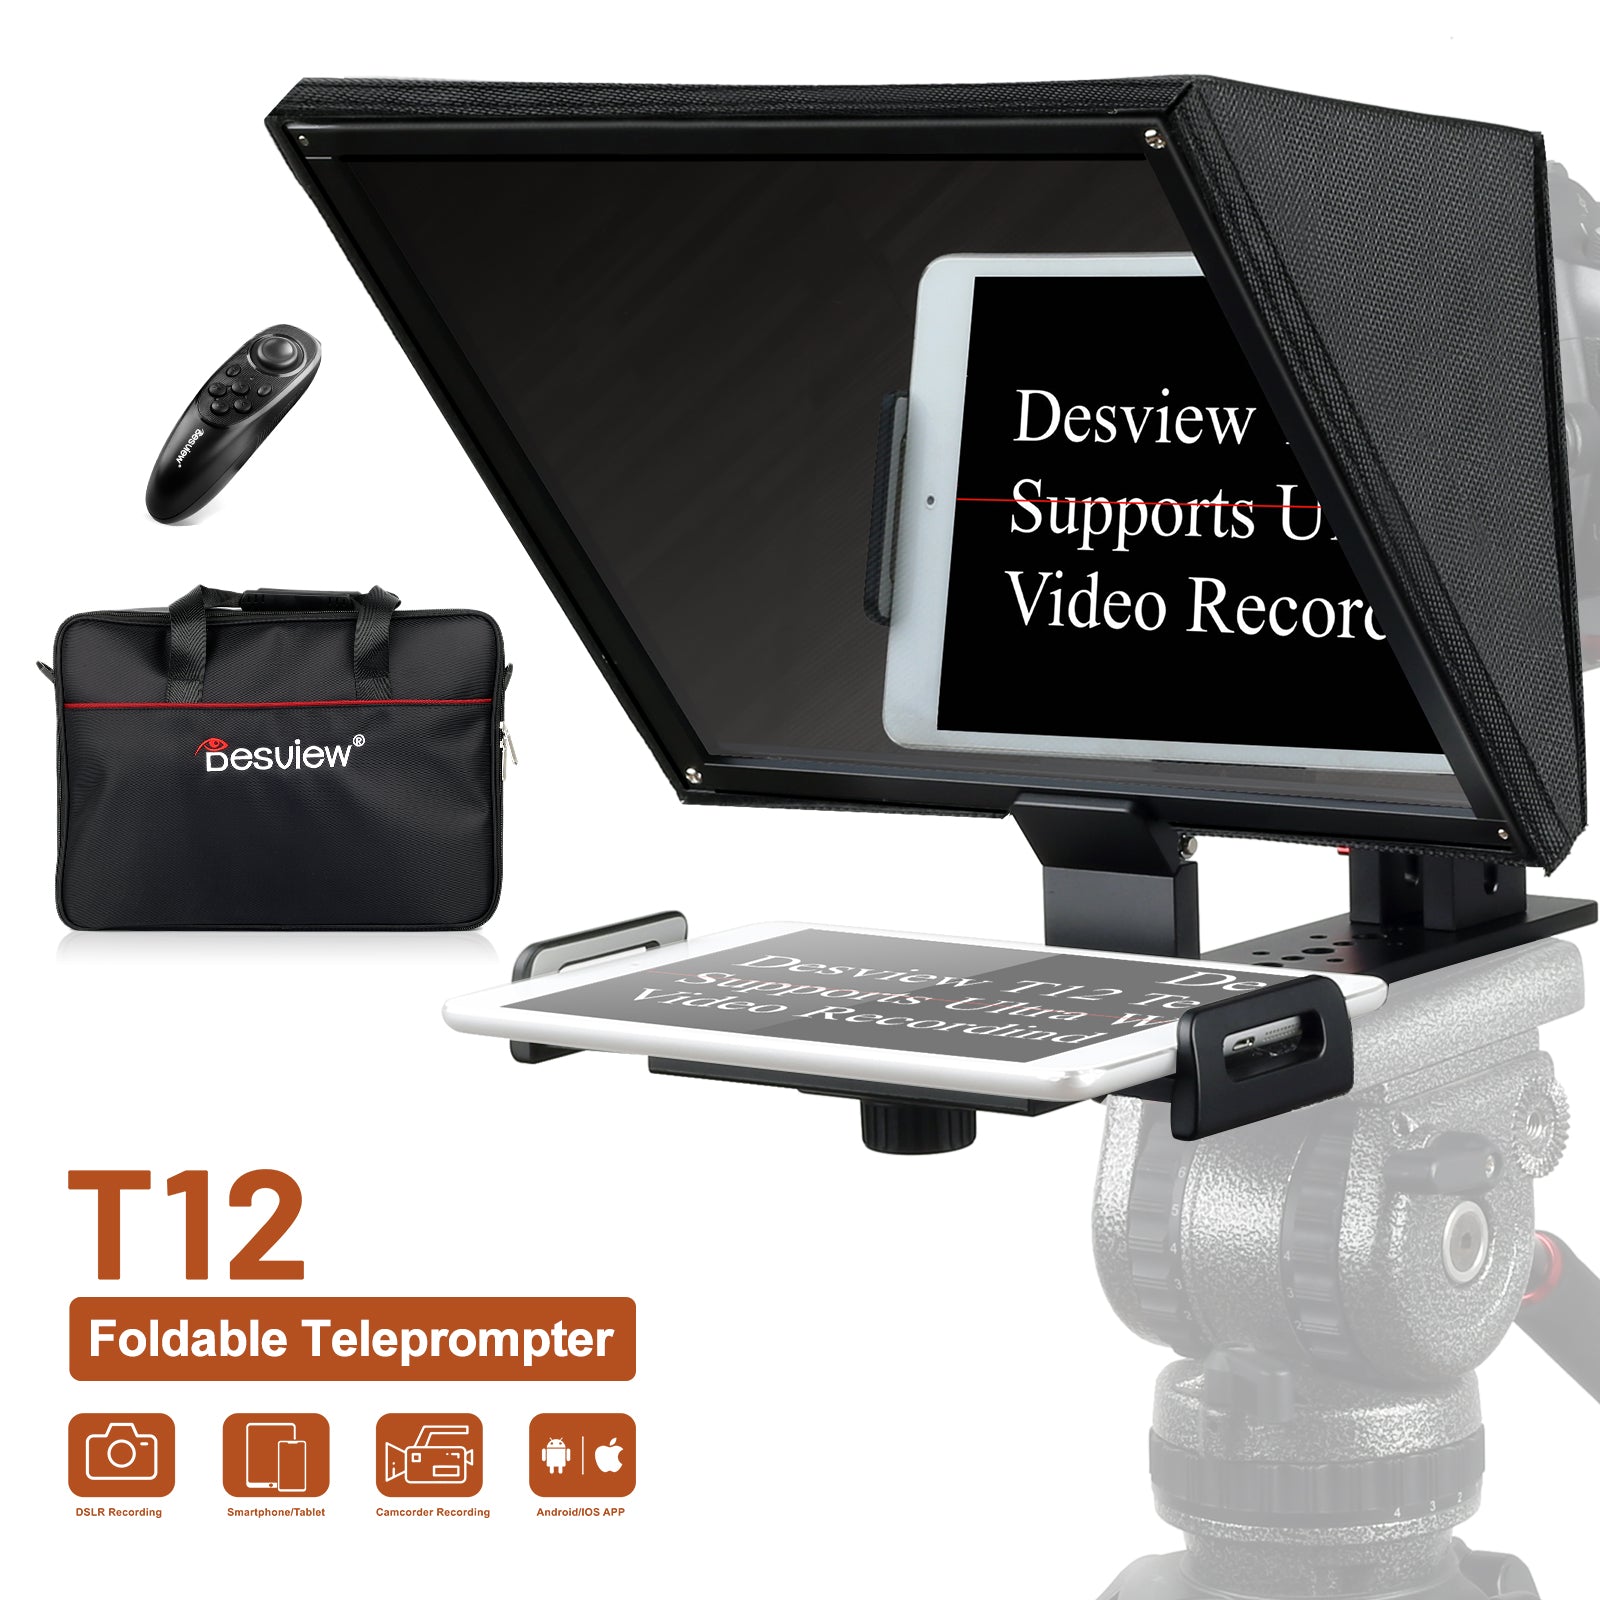 Desview T12 Teleprompter, 12.5 inch High Display Glass, Liftable Teleprompter with Remote Control, Metal Body, Compatible with DSLR/Camcorders/ipad, Easy Assembly with Carry Case for Video Making